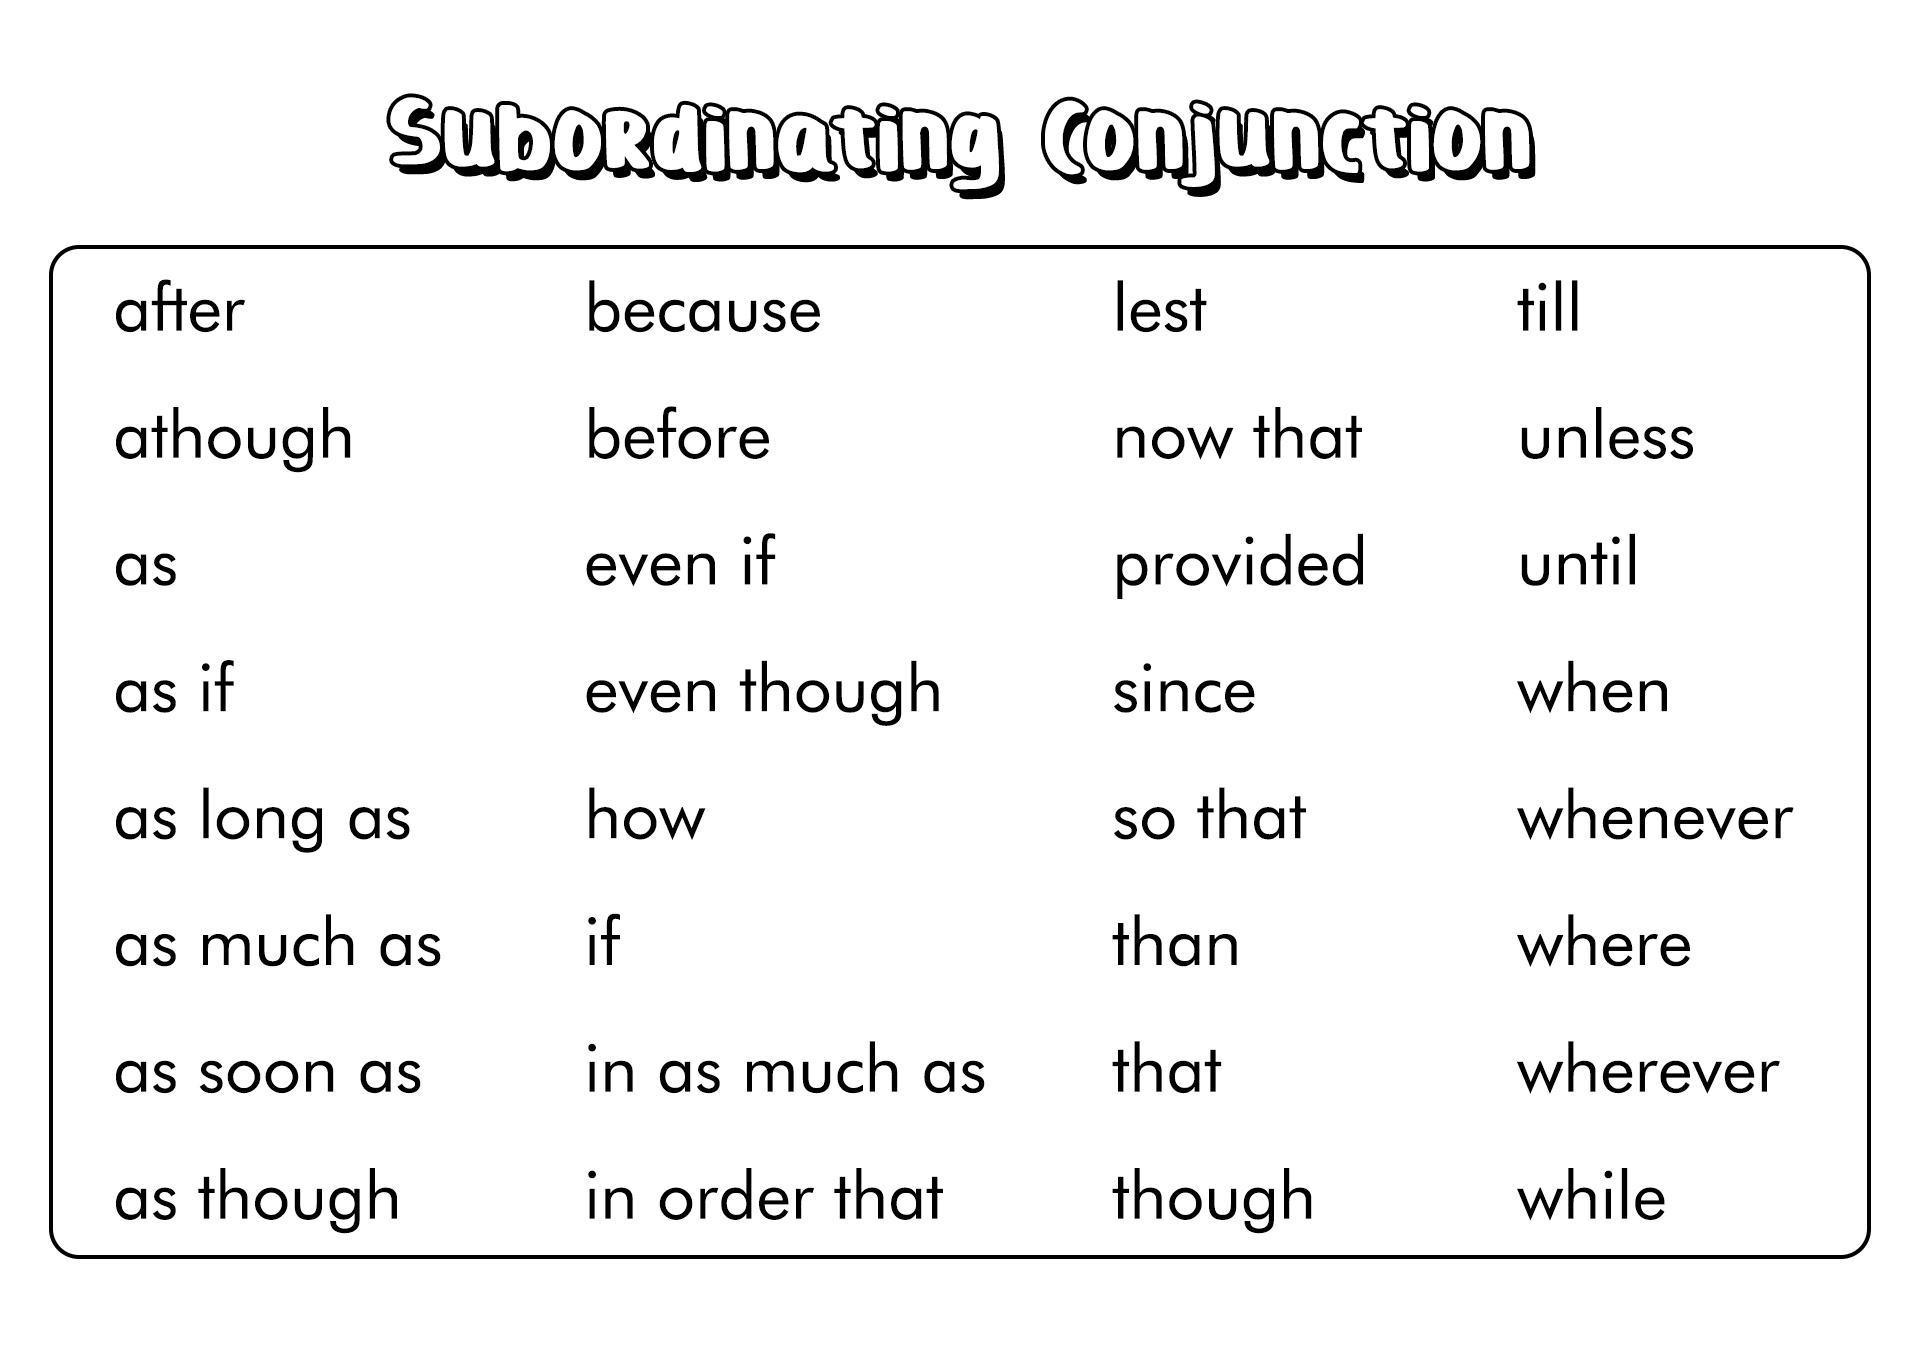 Subordinating Conjunctions List Image